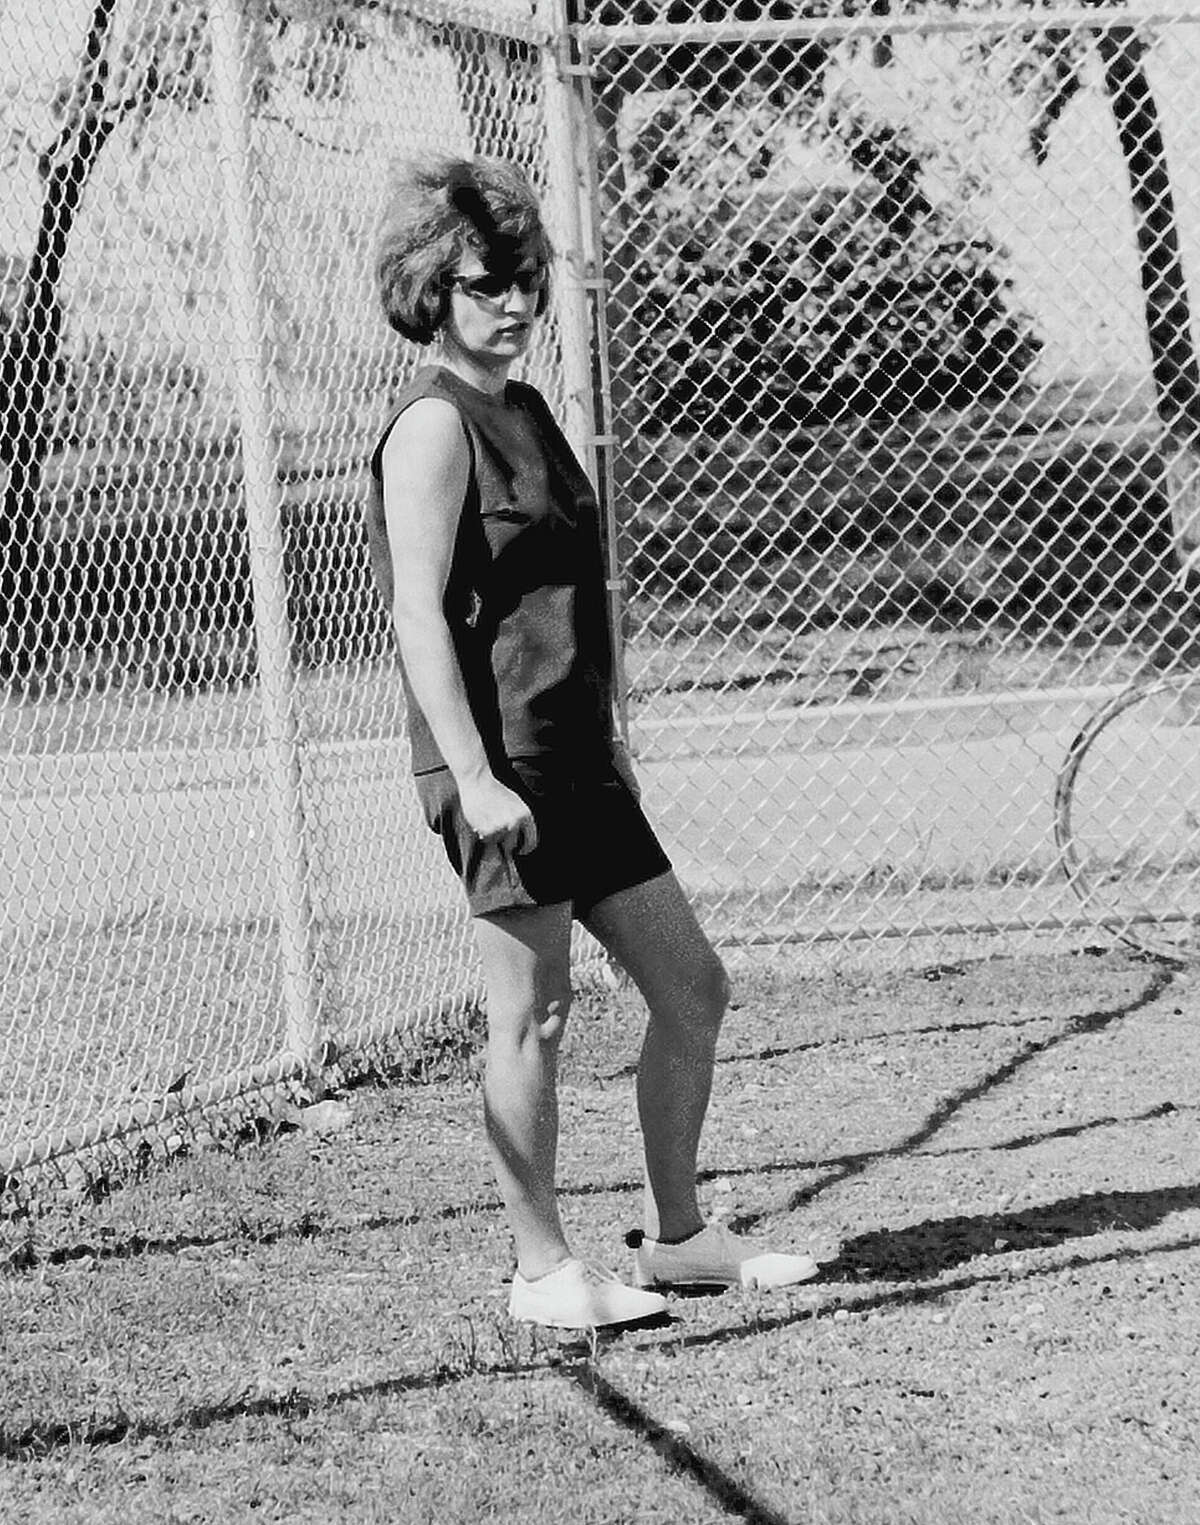 Libby Johnson coached varsity softball at Trinity in the 1970s, in addition to women's volleyball and basketball.